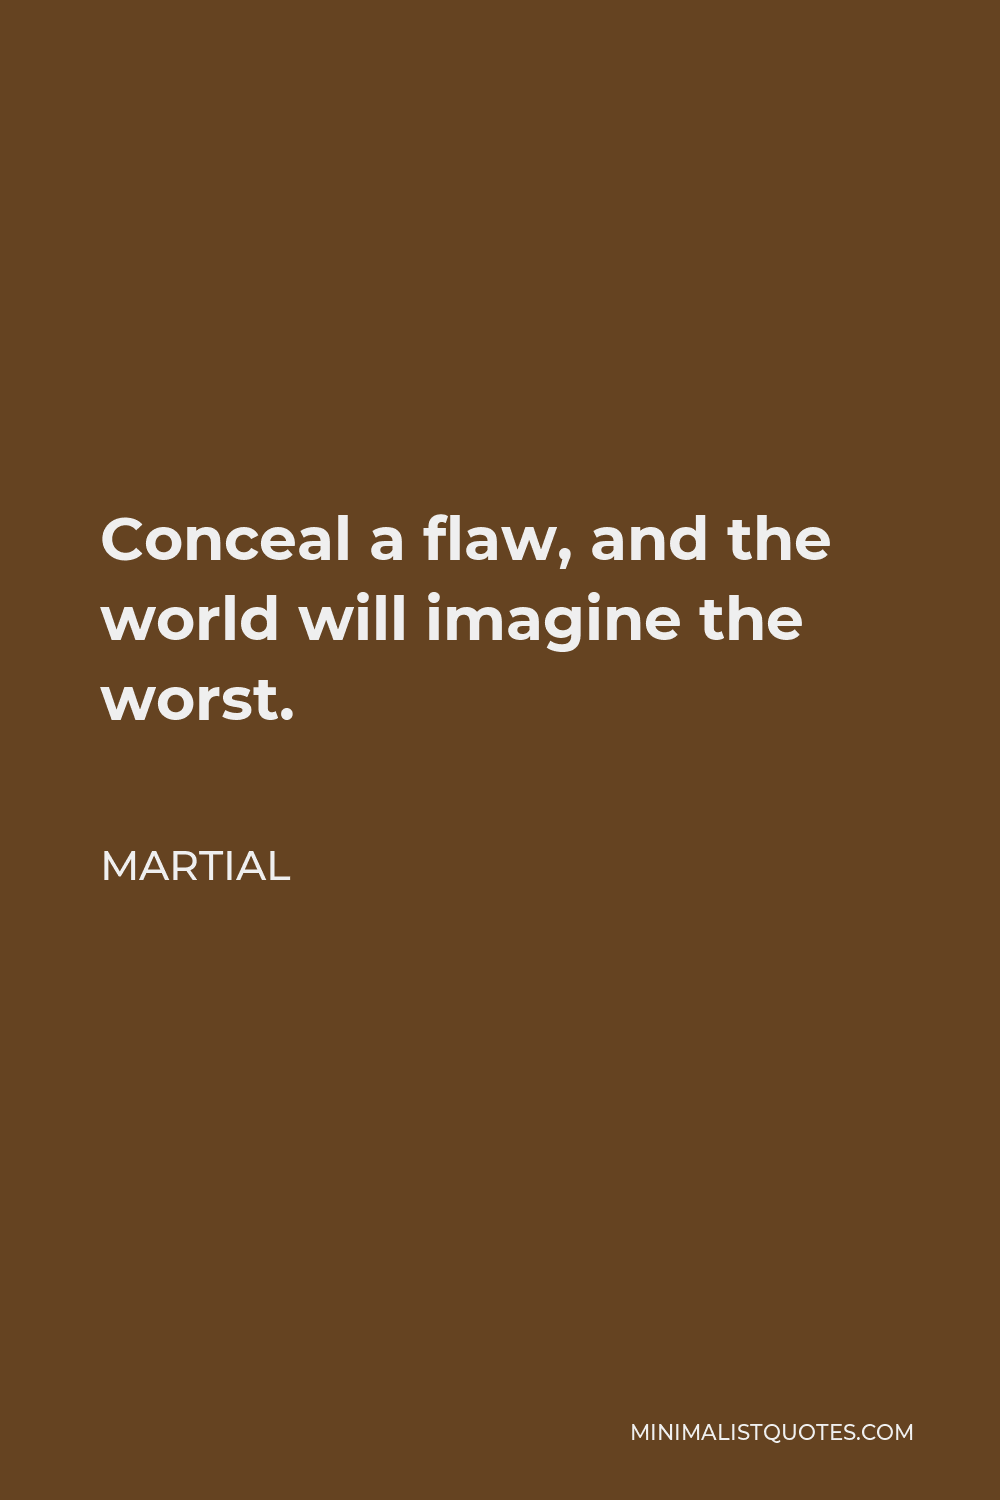 Martial Quote - Conceal a flaw, and the world will imagine the worst.